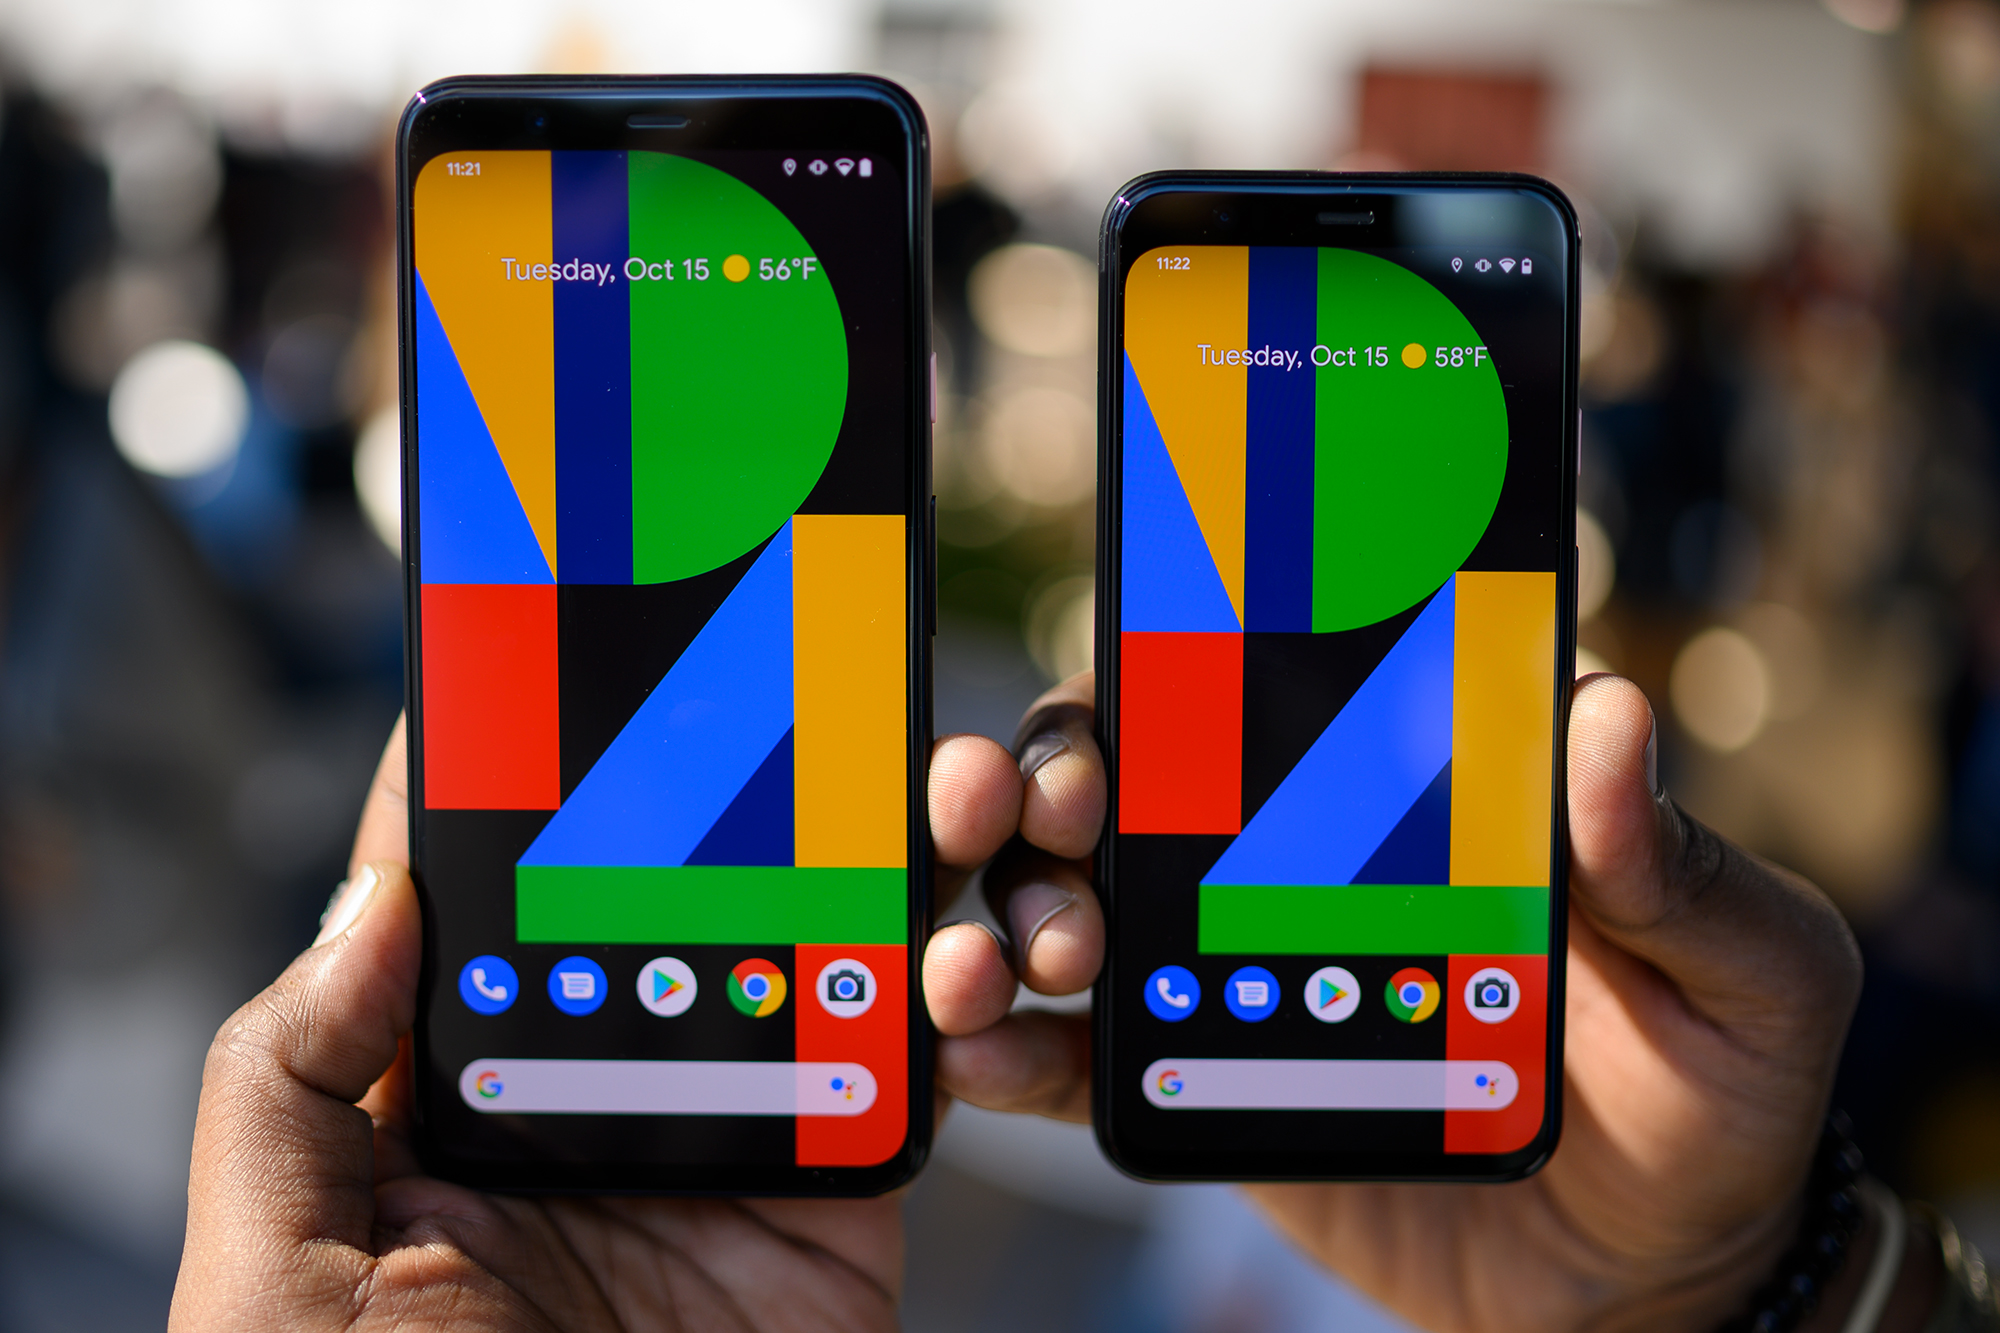 Google Pixel 4 XL vs Vivo V21: What is the difference?